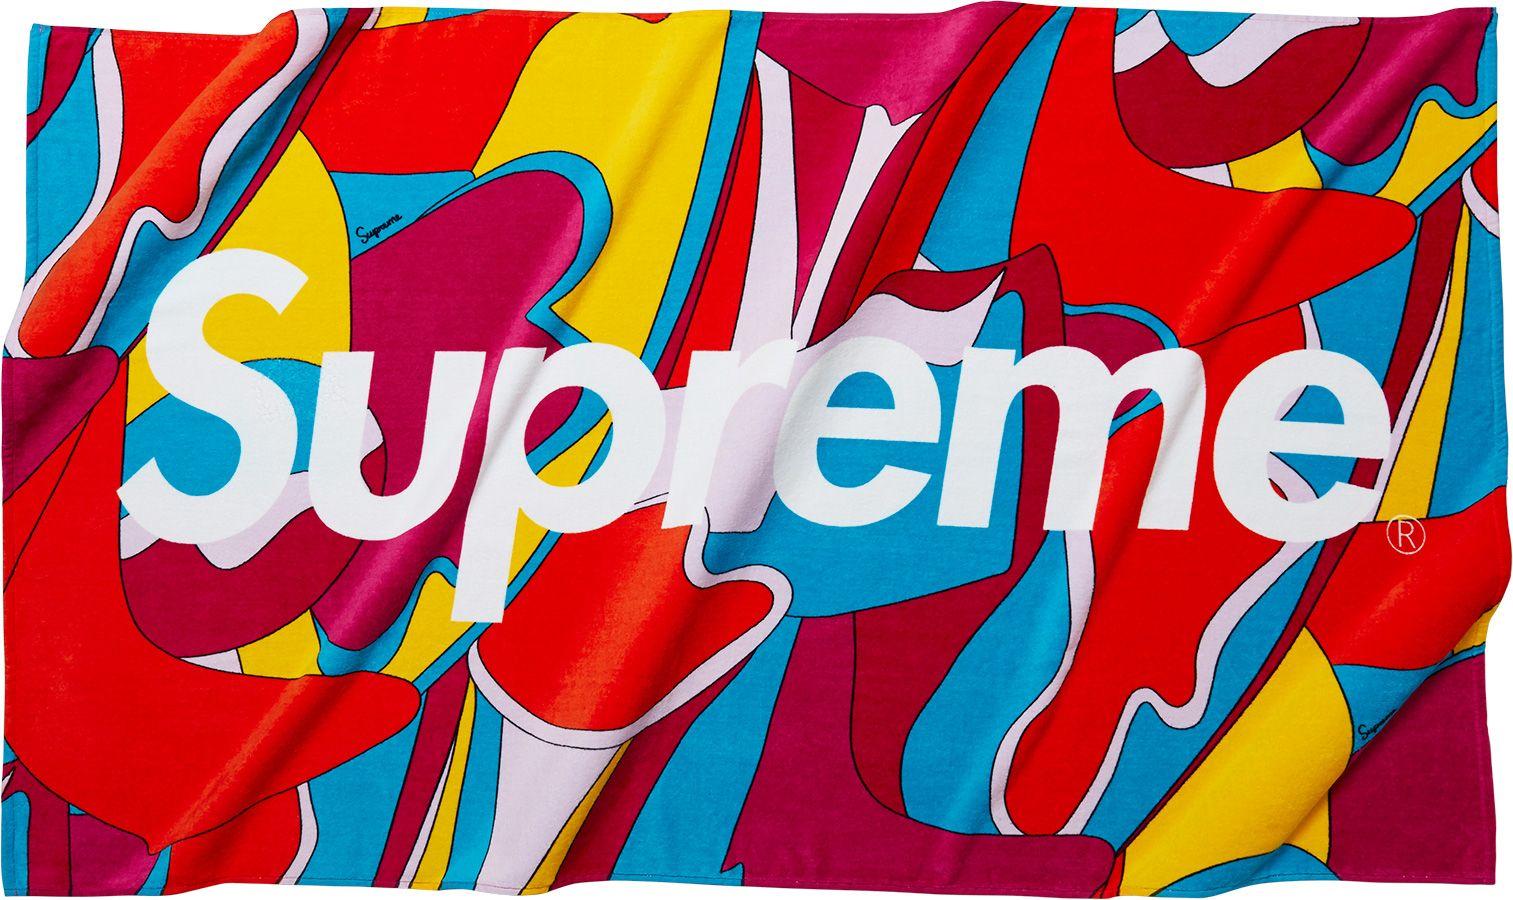 Multi Supreme Logo - The Collectibles That Prove Supreme Is Much More Than Clothes - Racked